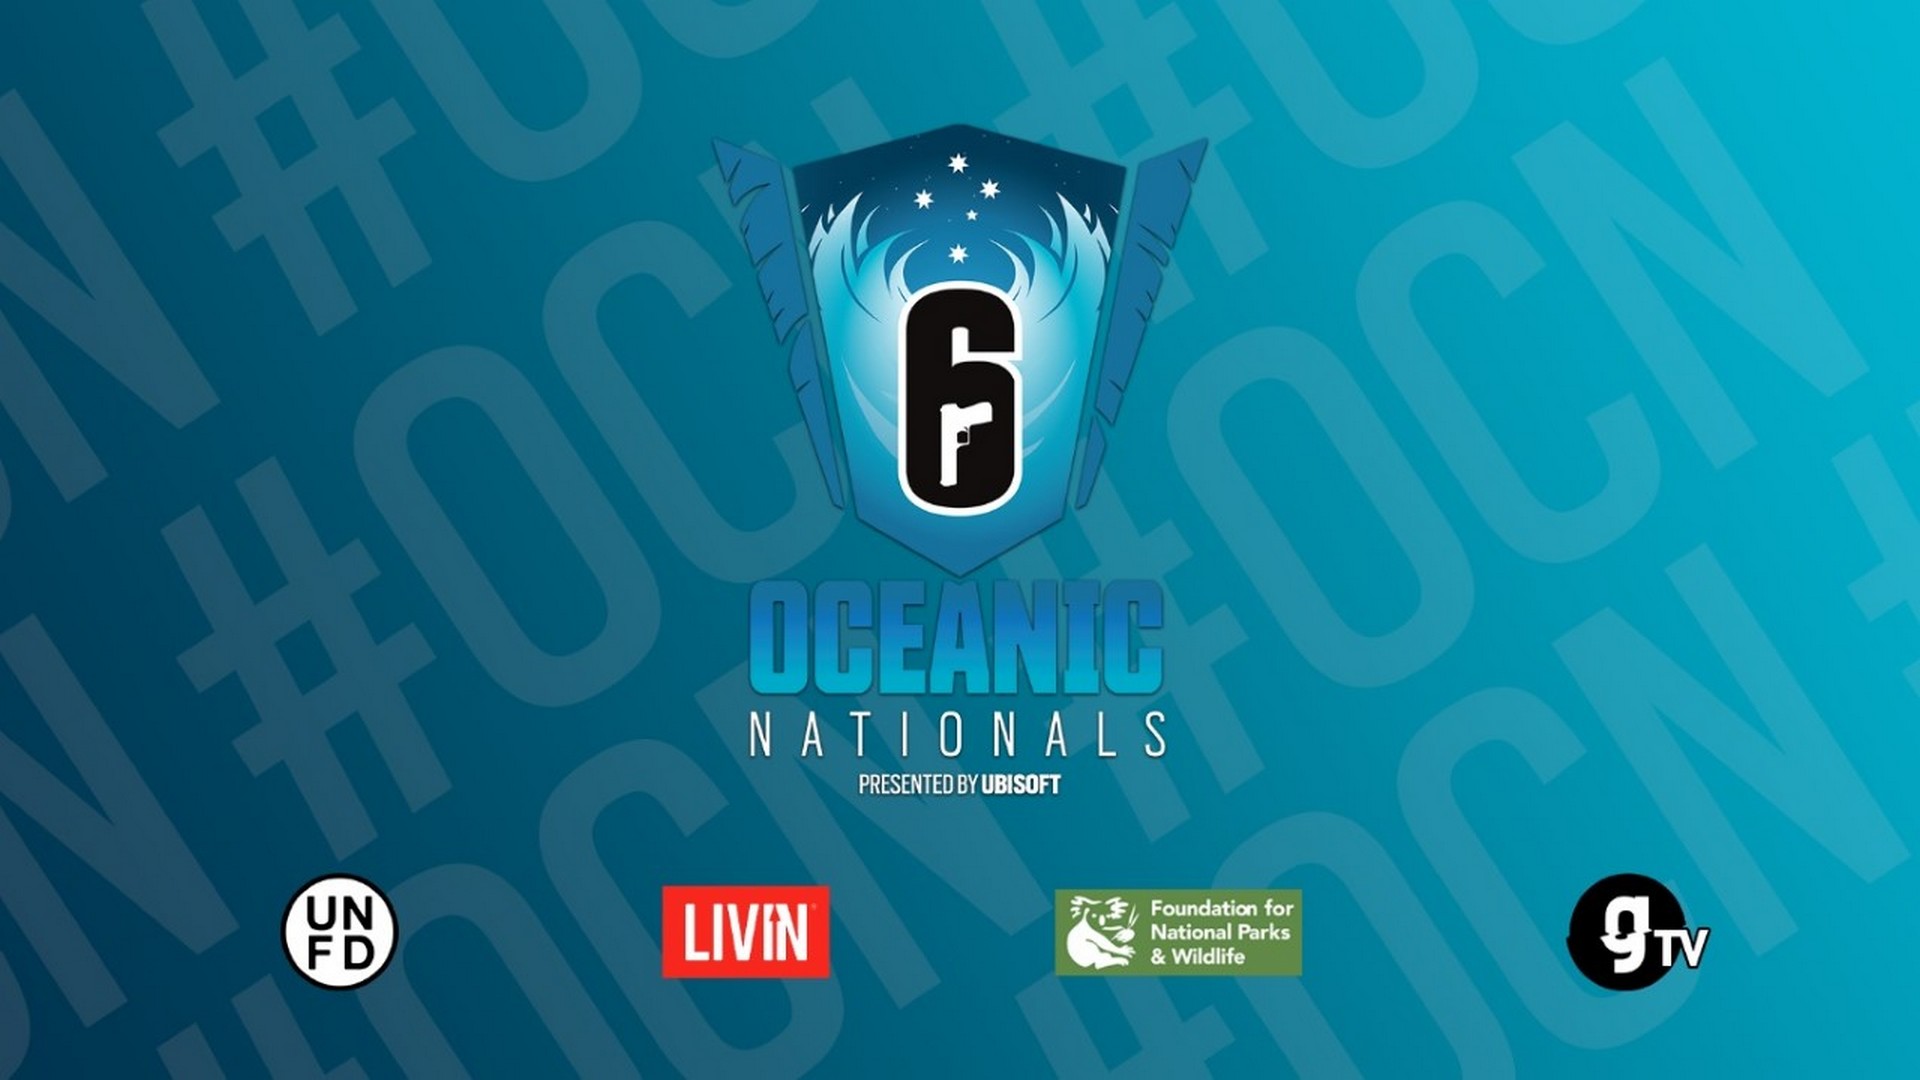 Ubisoft Australia Announces The Rainbow 6 Oceanic Nationals 2022 To Commence March 25